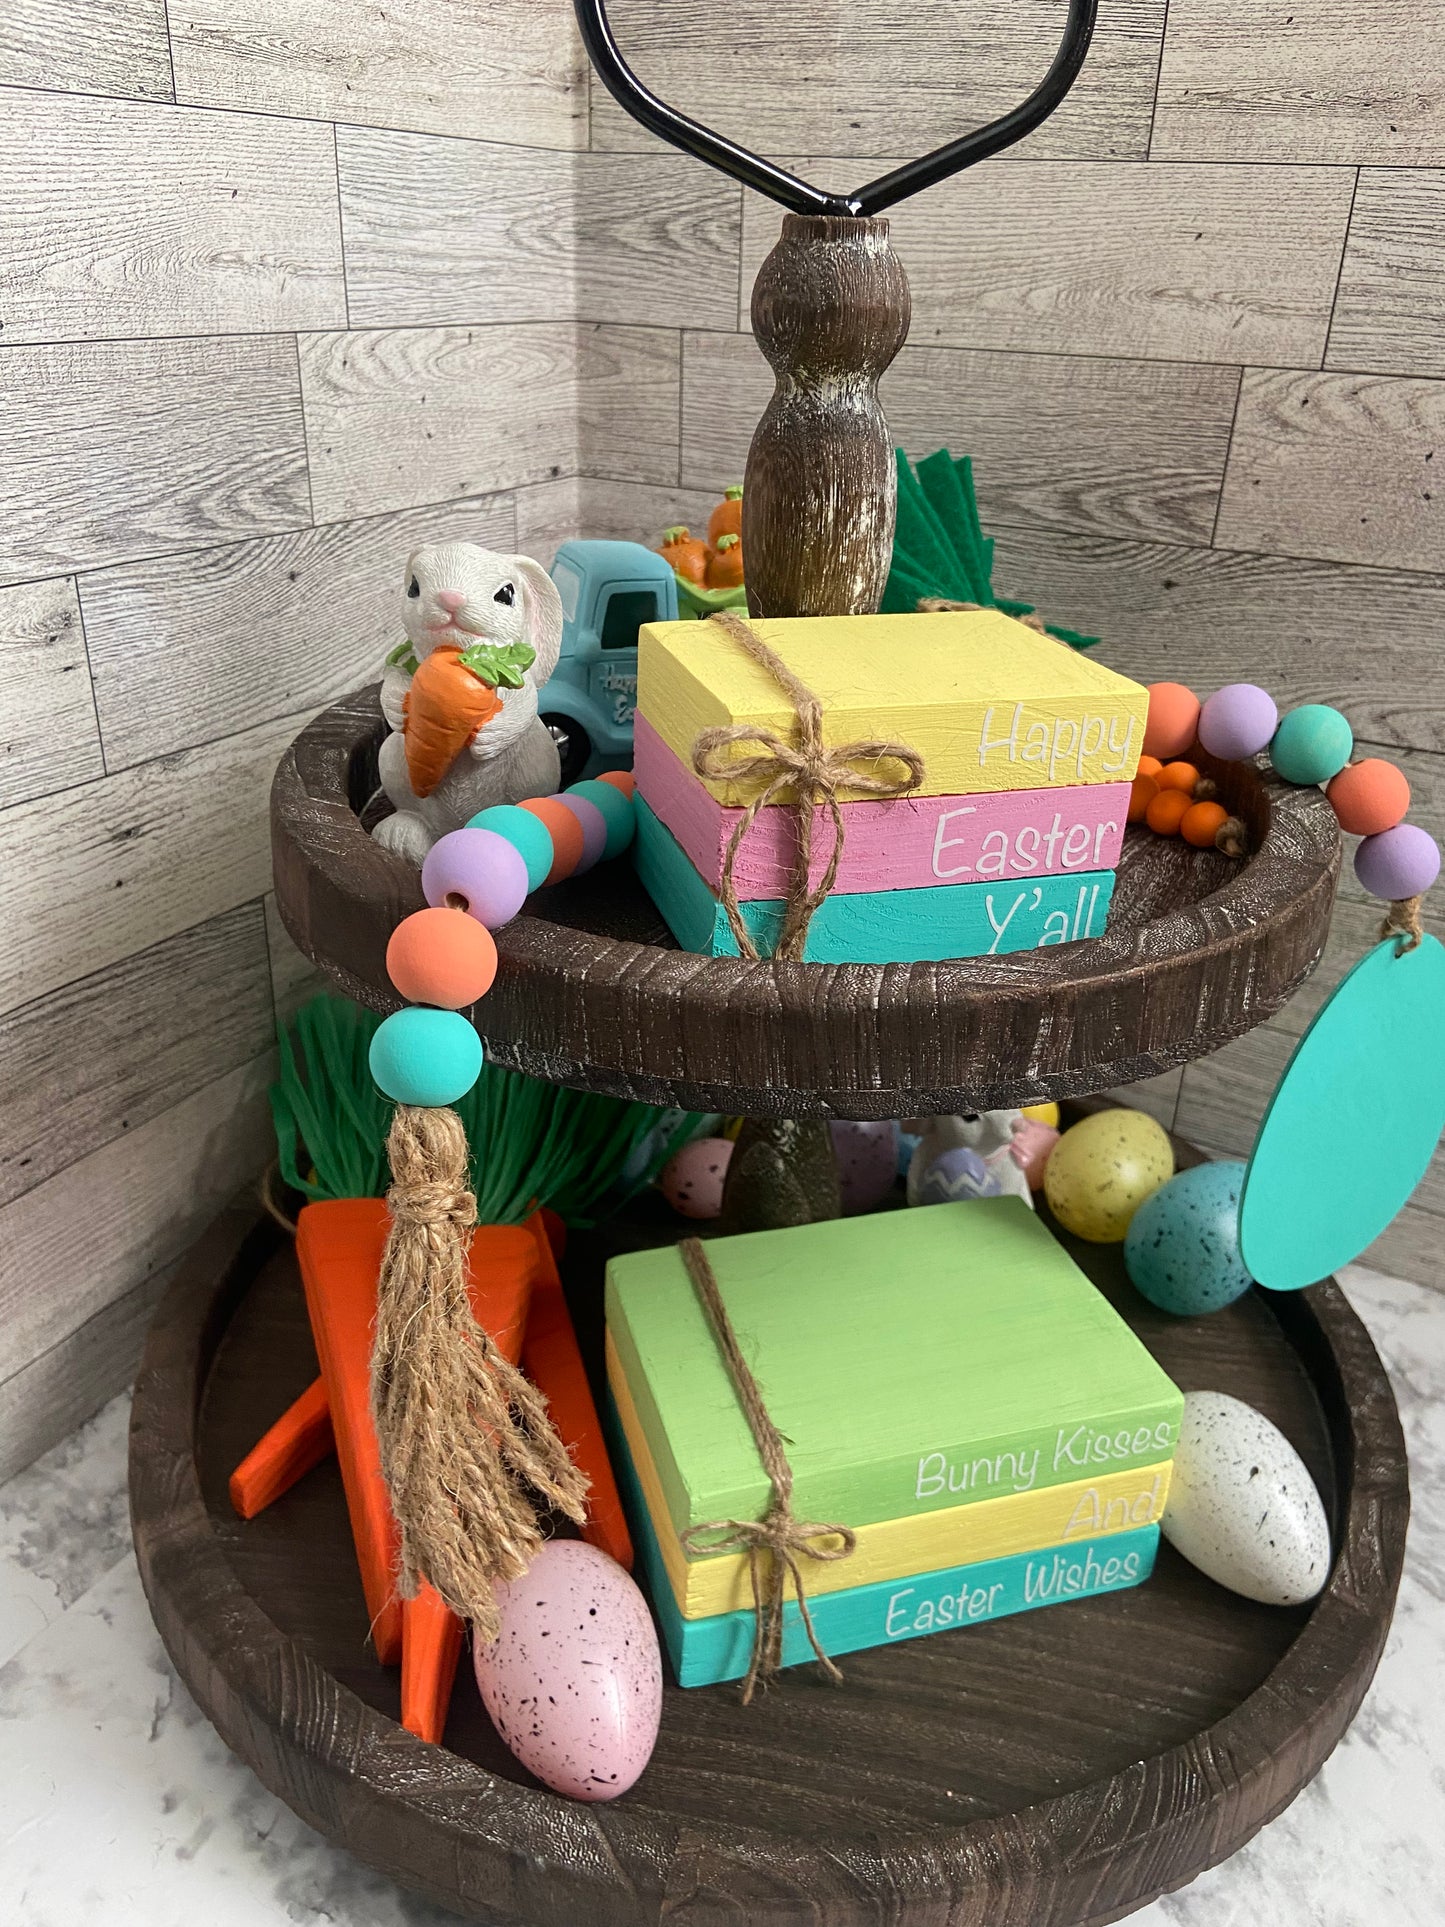 Bunny Kisses And Easter Wishes - Large Book Stack